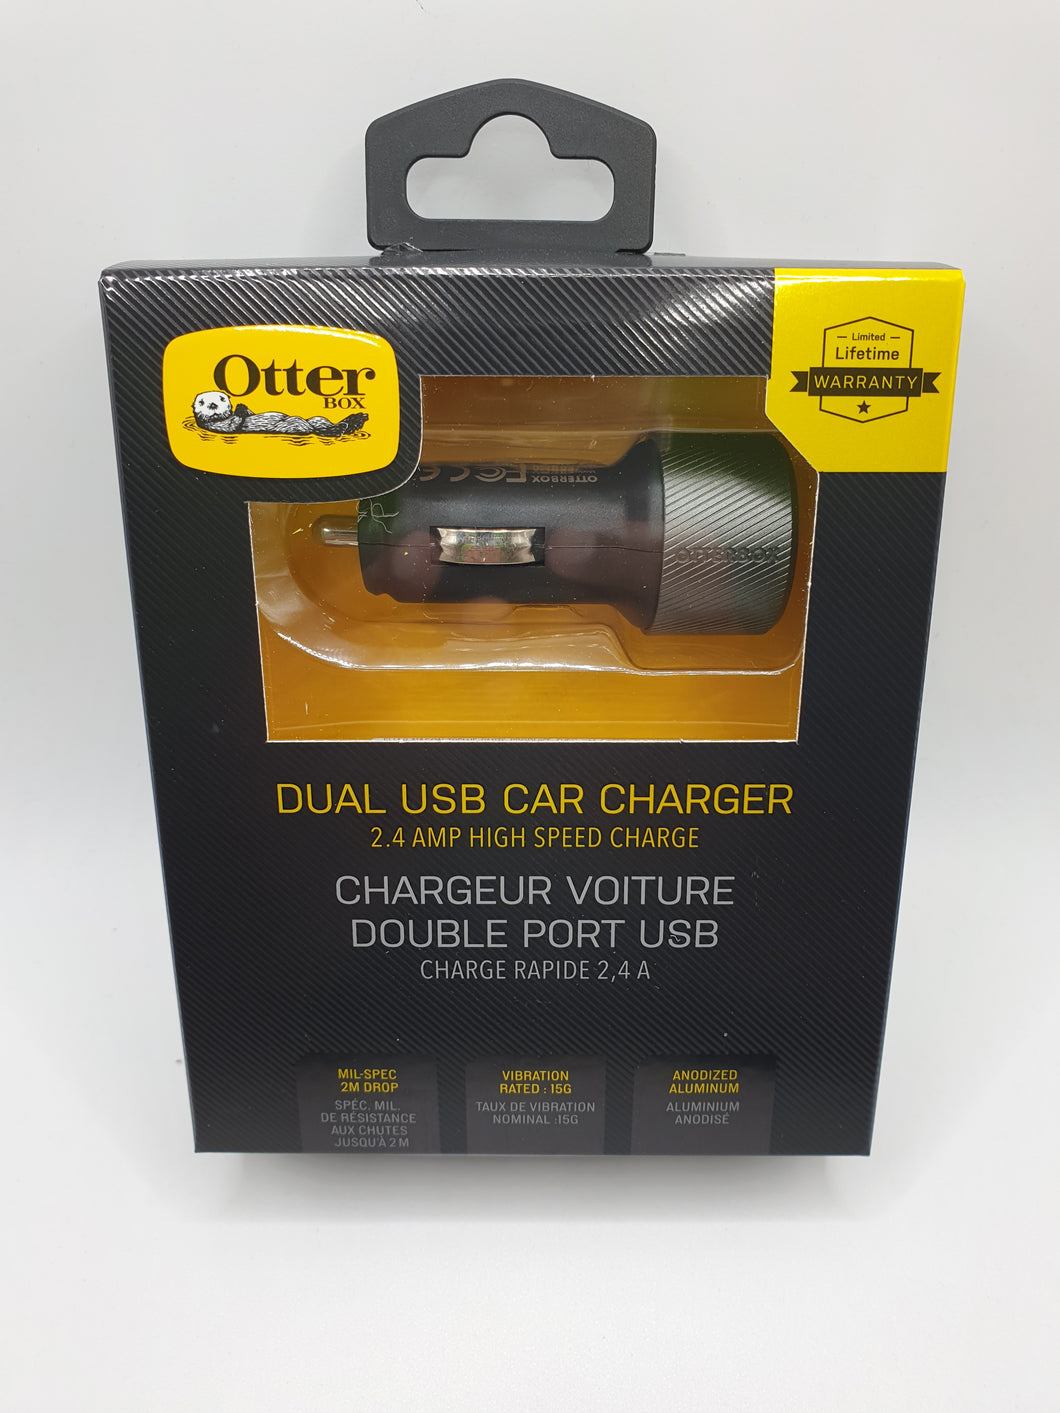 Ottorbox Dual Port USB Car Charger 2.4AMP High Speed Charge Rugged Shock Resistant Limited Lifetime Warranty